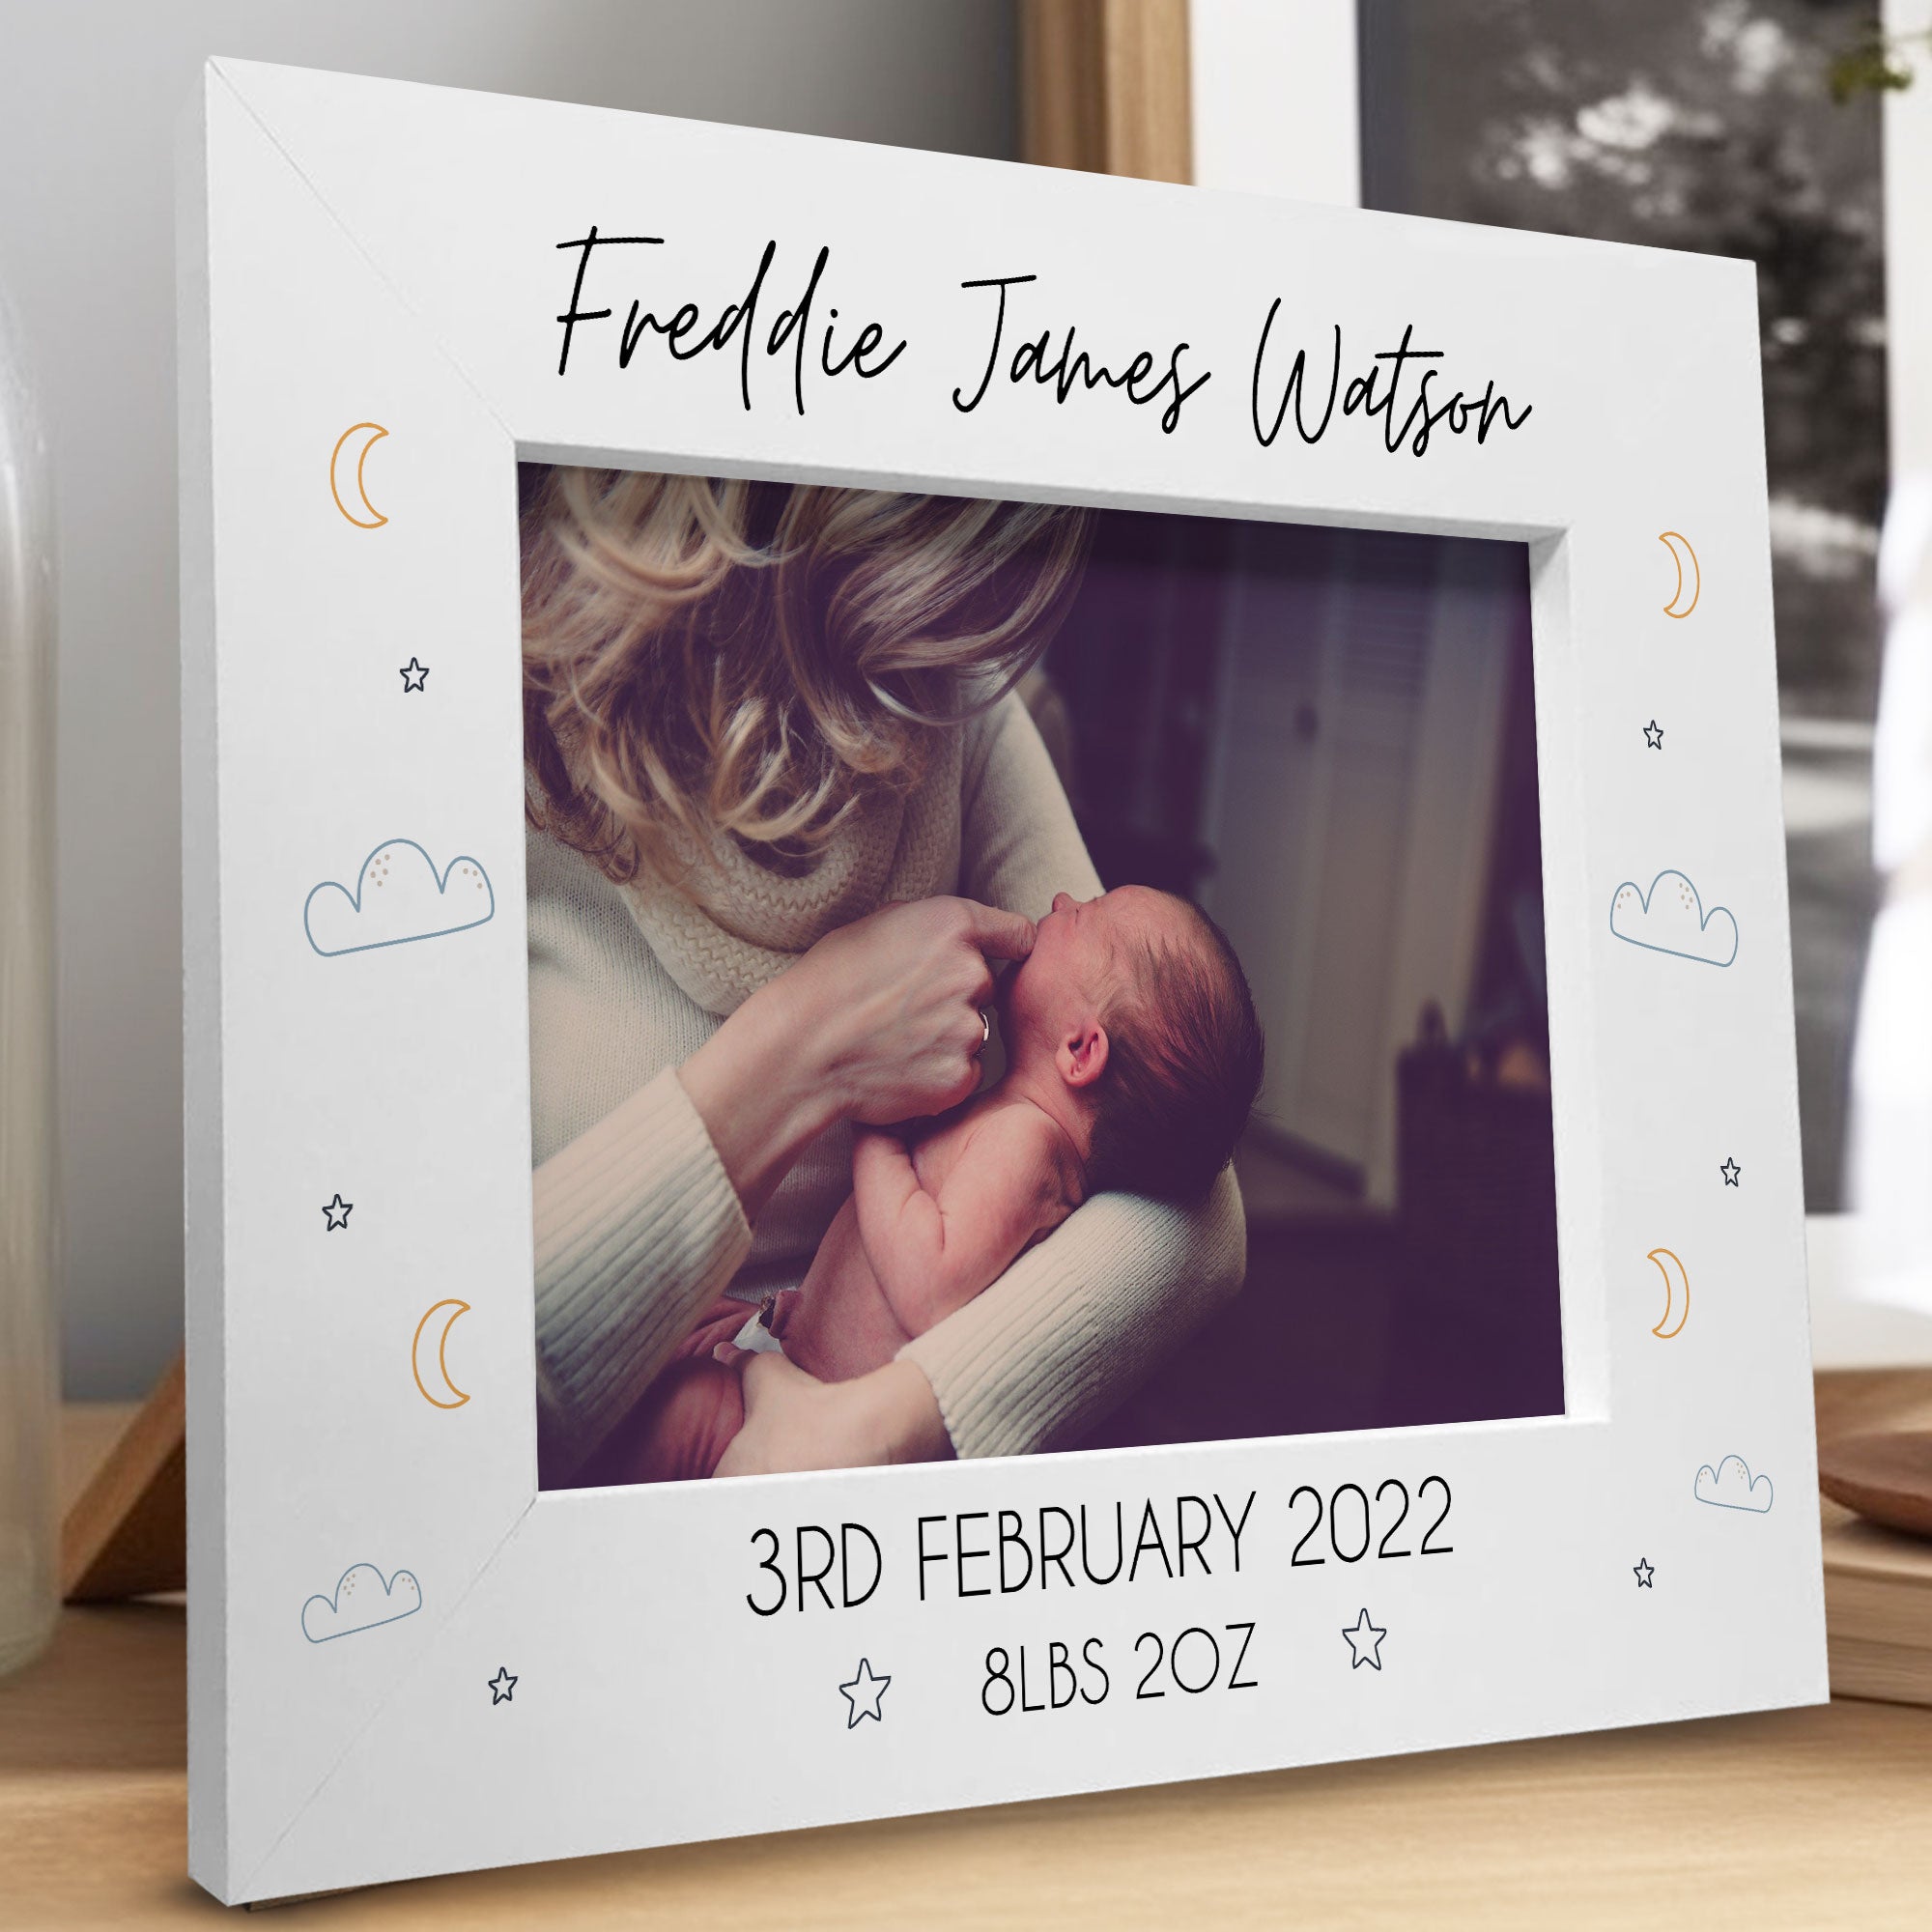 Personalised New Baby Gifts - Baby Gift Set, Baby Hamper Nappy Caddy Set - Personalised  Baby Gifts, New Born Baby Essentials, Personalised Gifts for Baby with  Multi-Functional Nappy Caddy Bag : Amazon.co.uk: